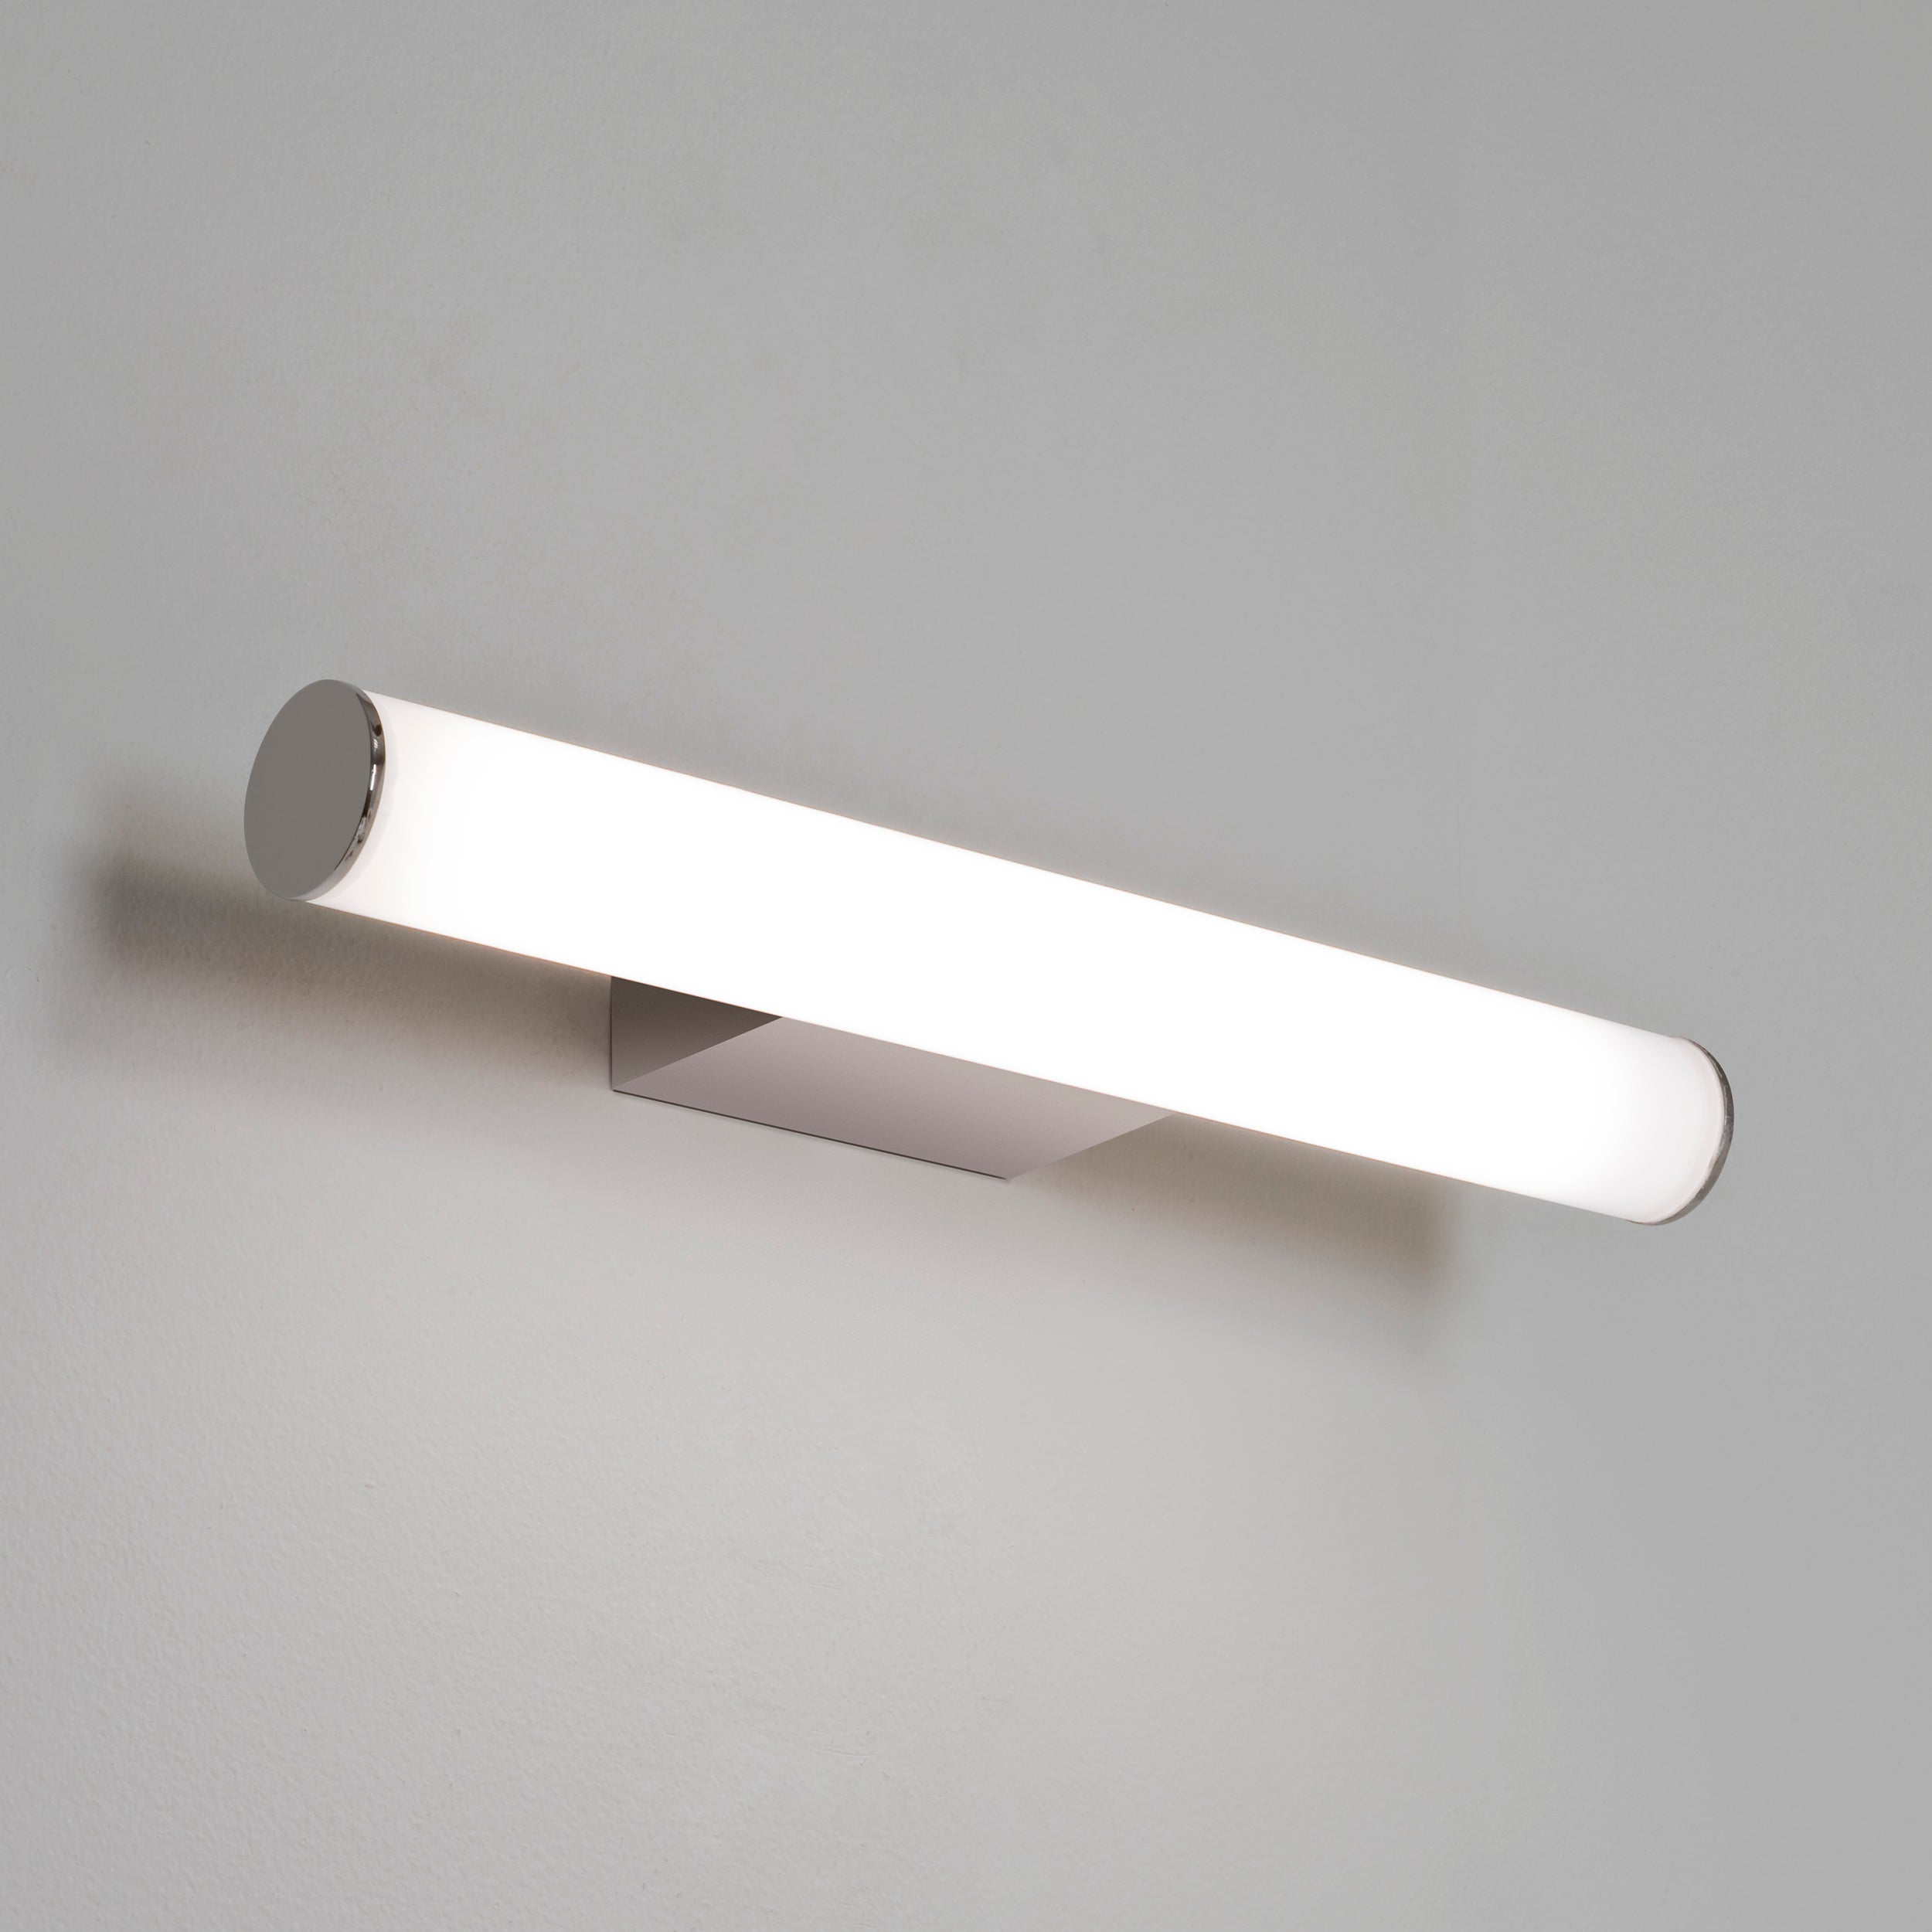 Astro Lighting Dio Wall Light Fixtures Astro Lighting 3.54x13.39x1.57 Polished Chrome Yes (Integral), Mid-Power LED